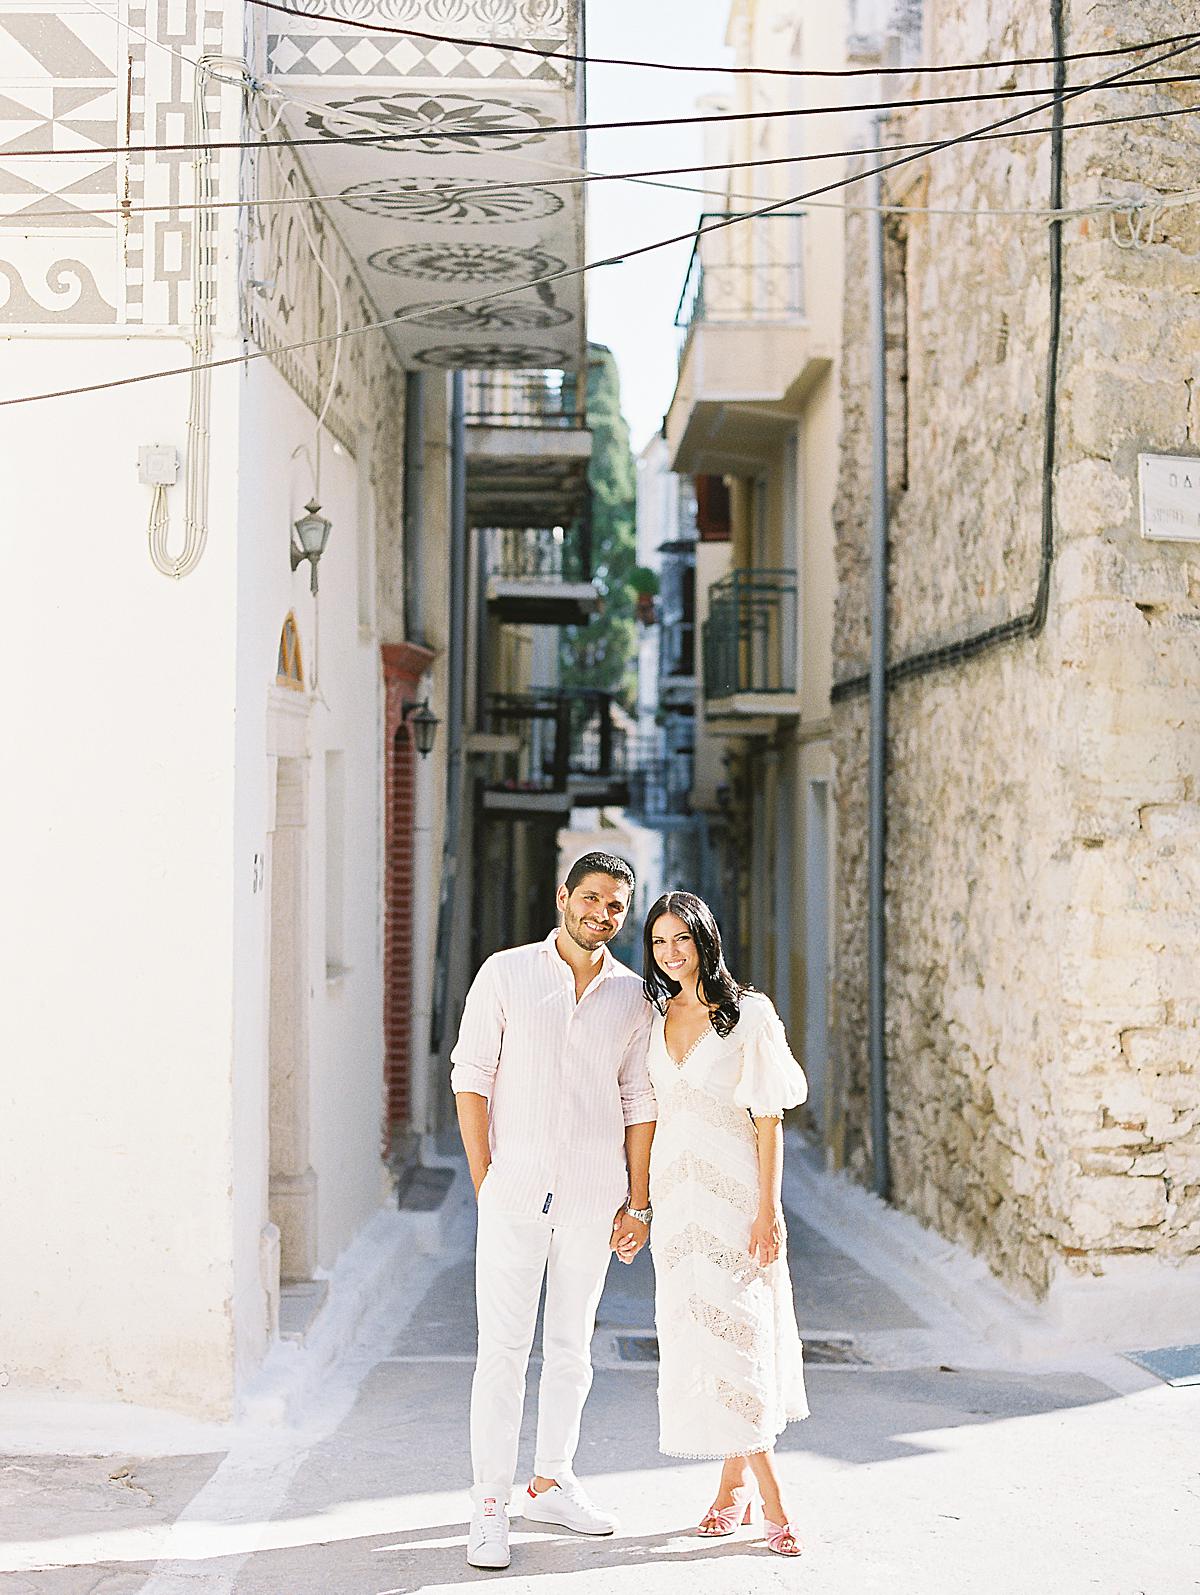 engagement session images at Chios island Greece